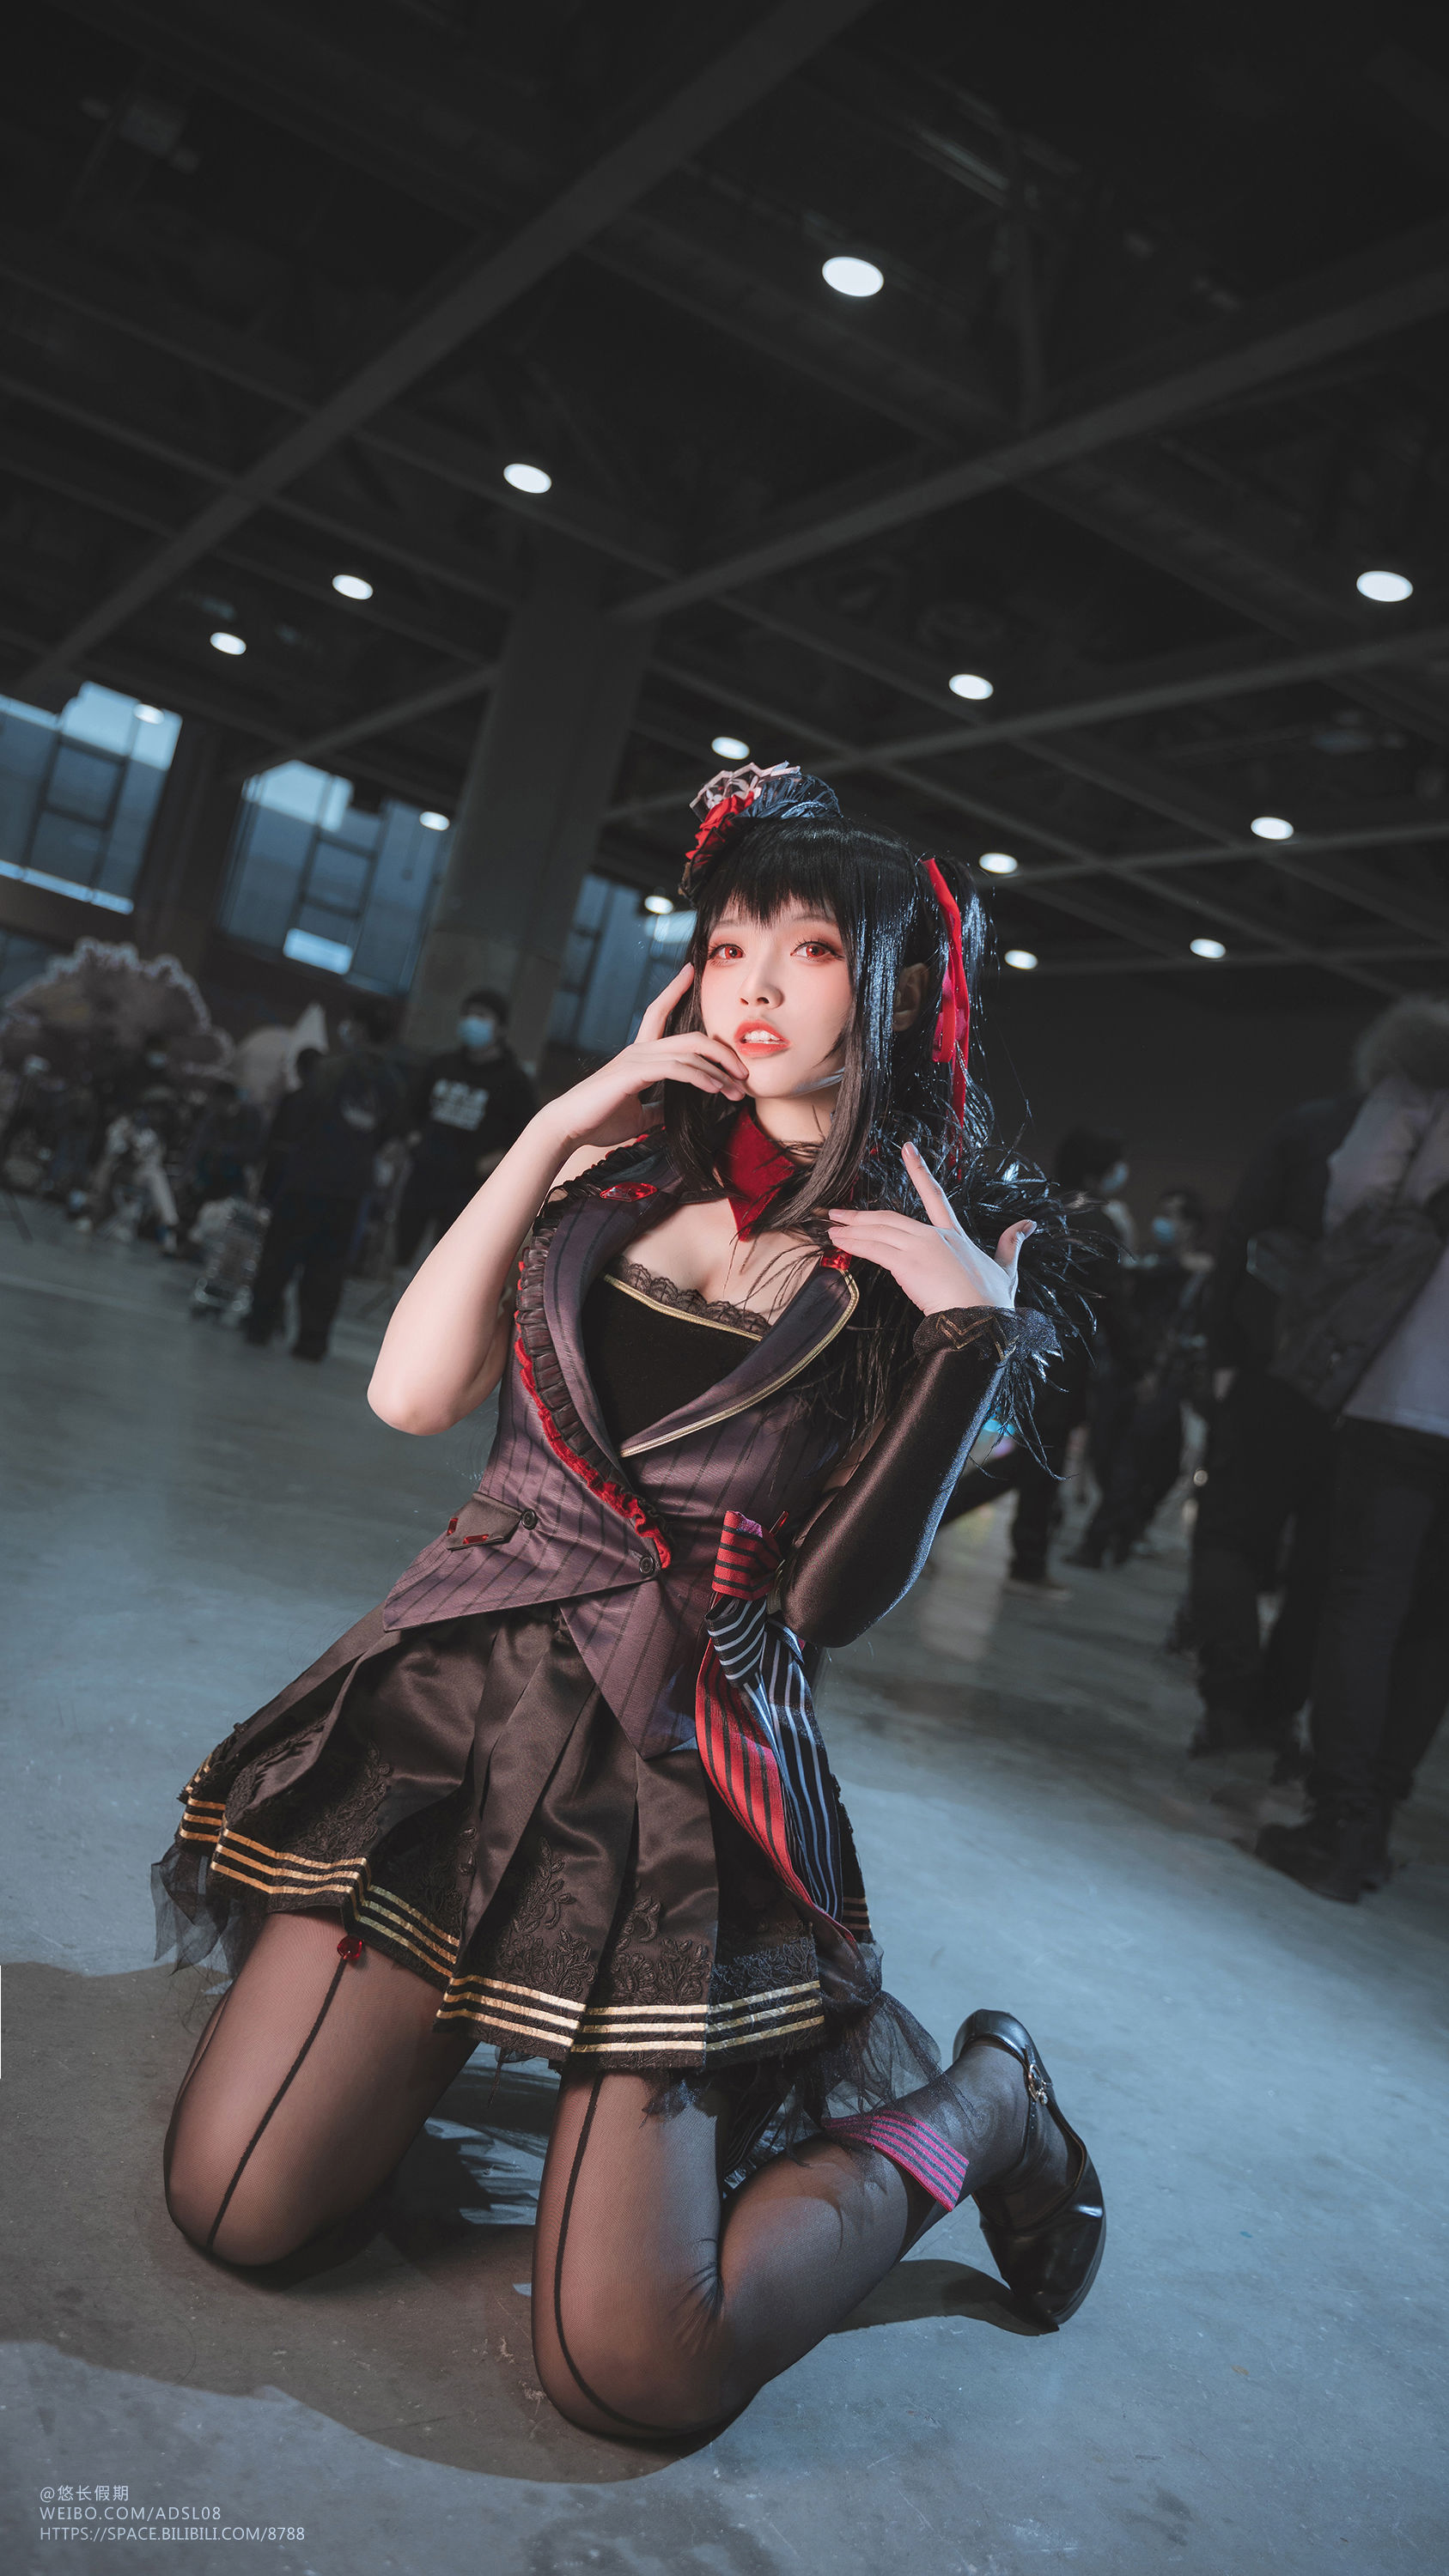 [COS Welfare] Anime Bloggers Big Volume Volume Small Volume - 2021 Firefly Comic Con Page 15 No.87798a